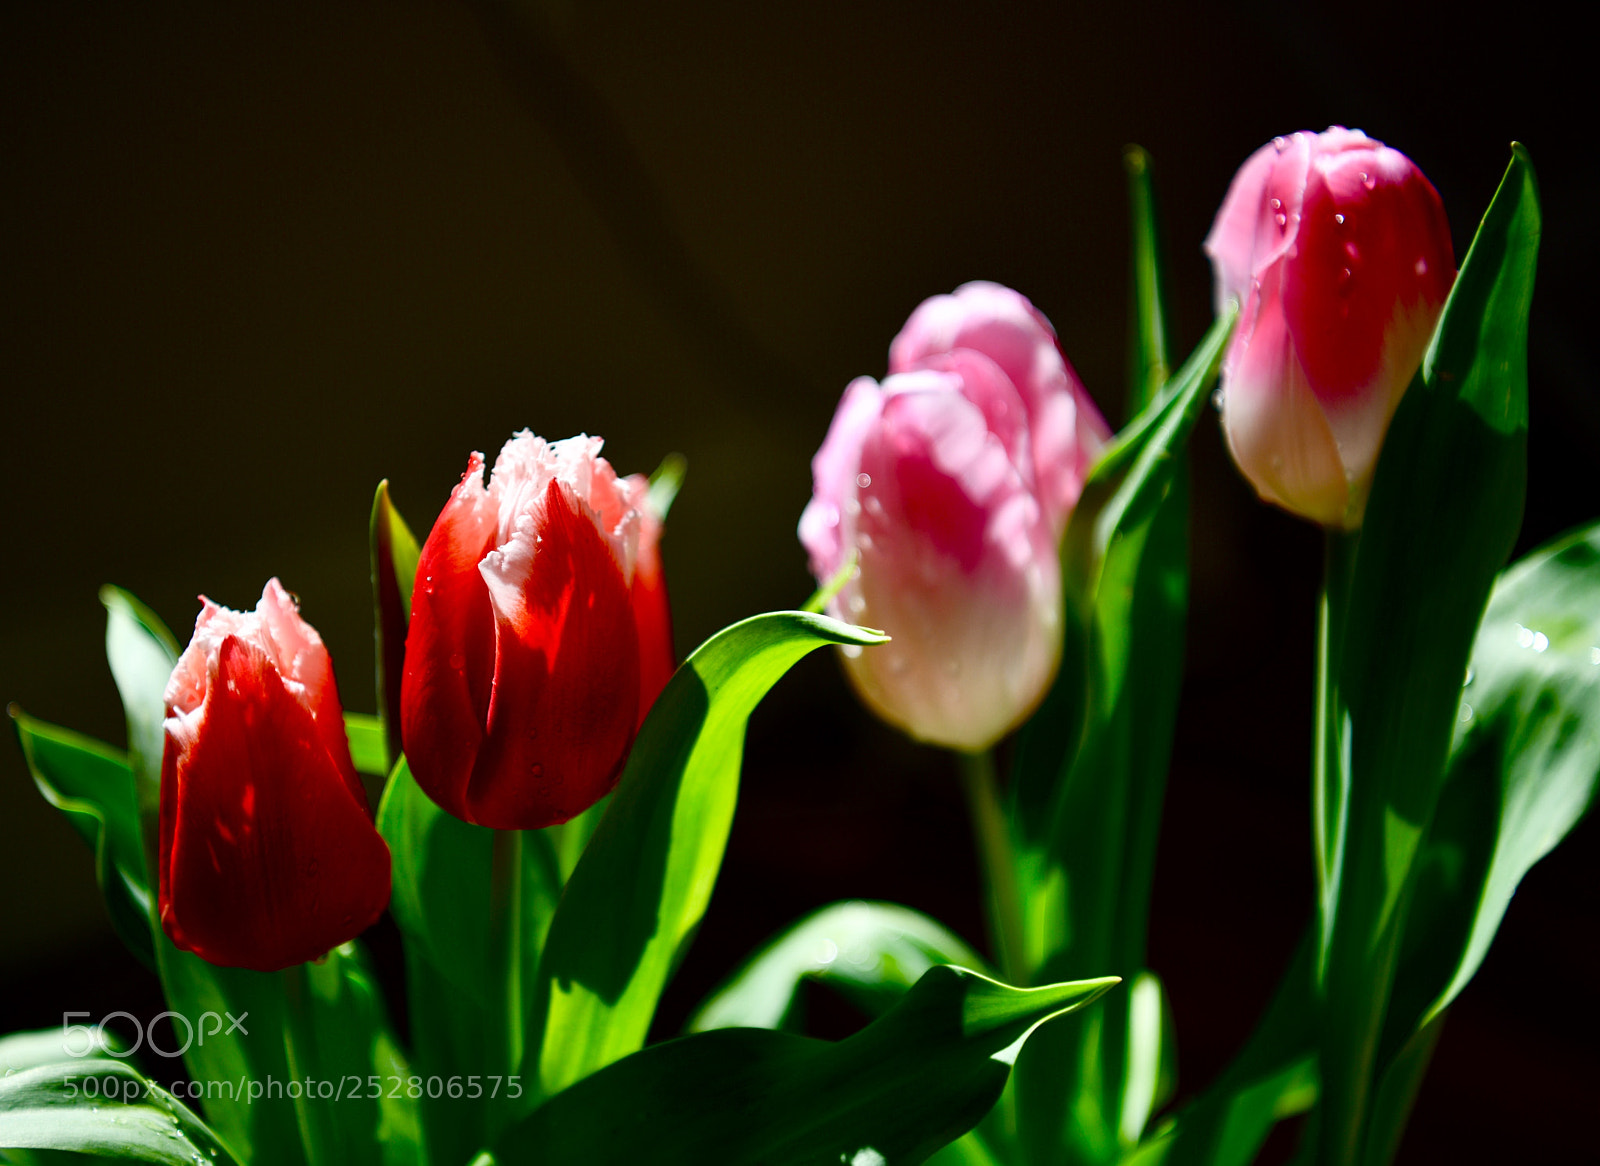 Nikon D850 sample photo. The tulips are blooming photography